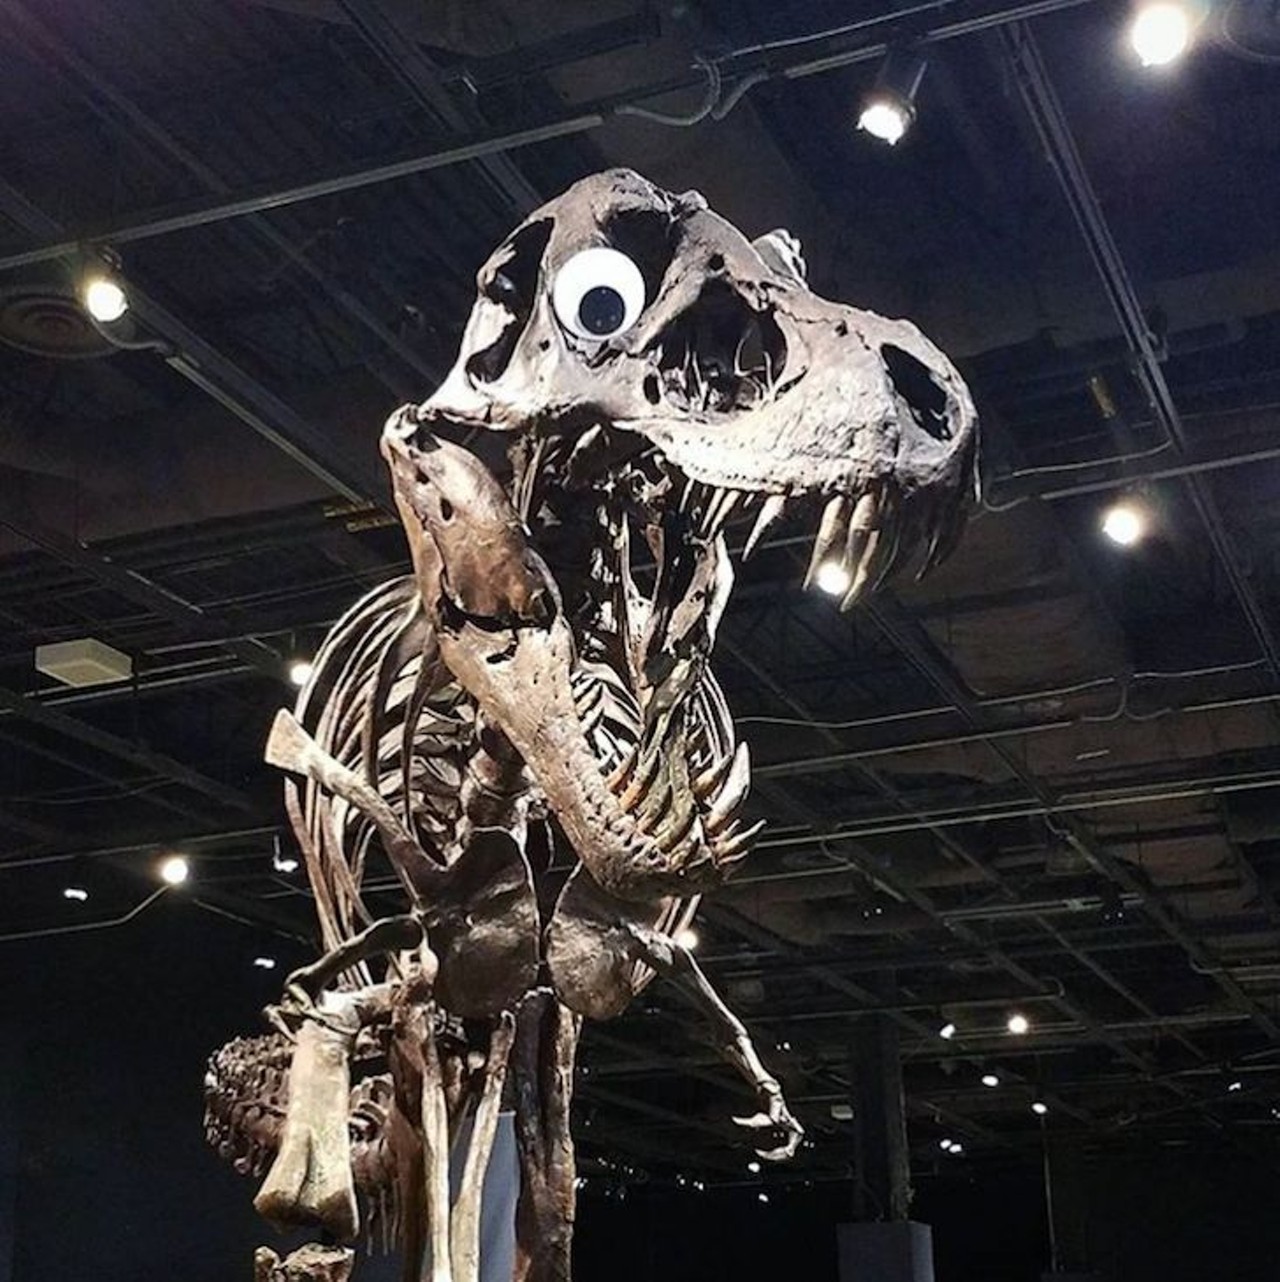 Orlando Science Center
777 E. Princeton St., 407-514-2000
Orlando Science Center is filled with wonders that will pique your interest and indulge your curious bone. There&#146;s a variety of exhibits and programs, like ScienceLive! animal interactions and digital adventure shows.
Photo via orlandosciencecenter/Instagram